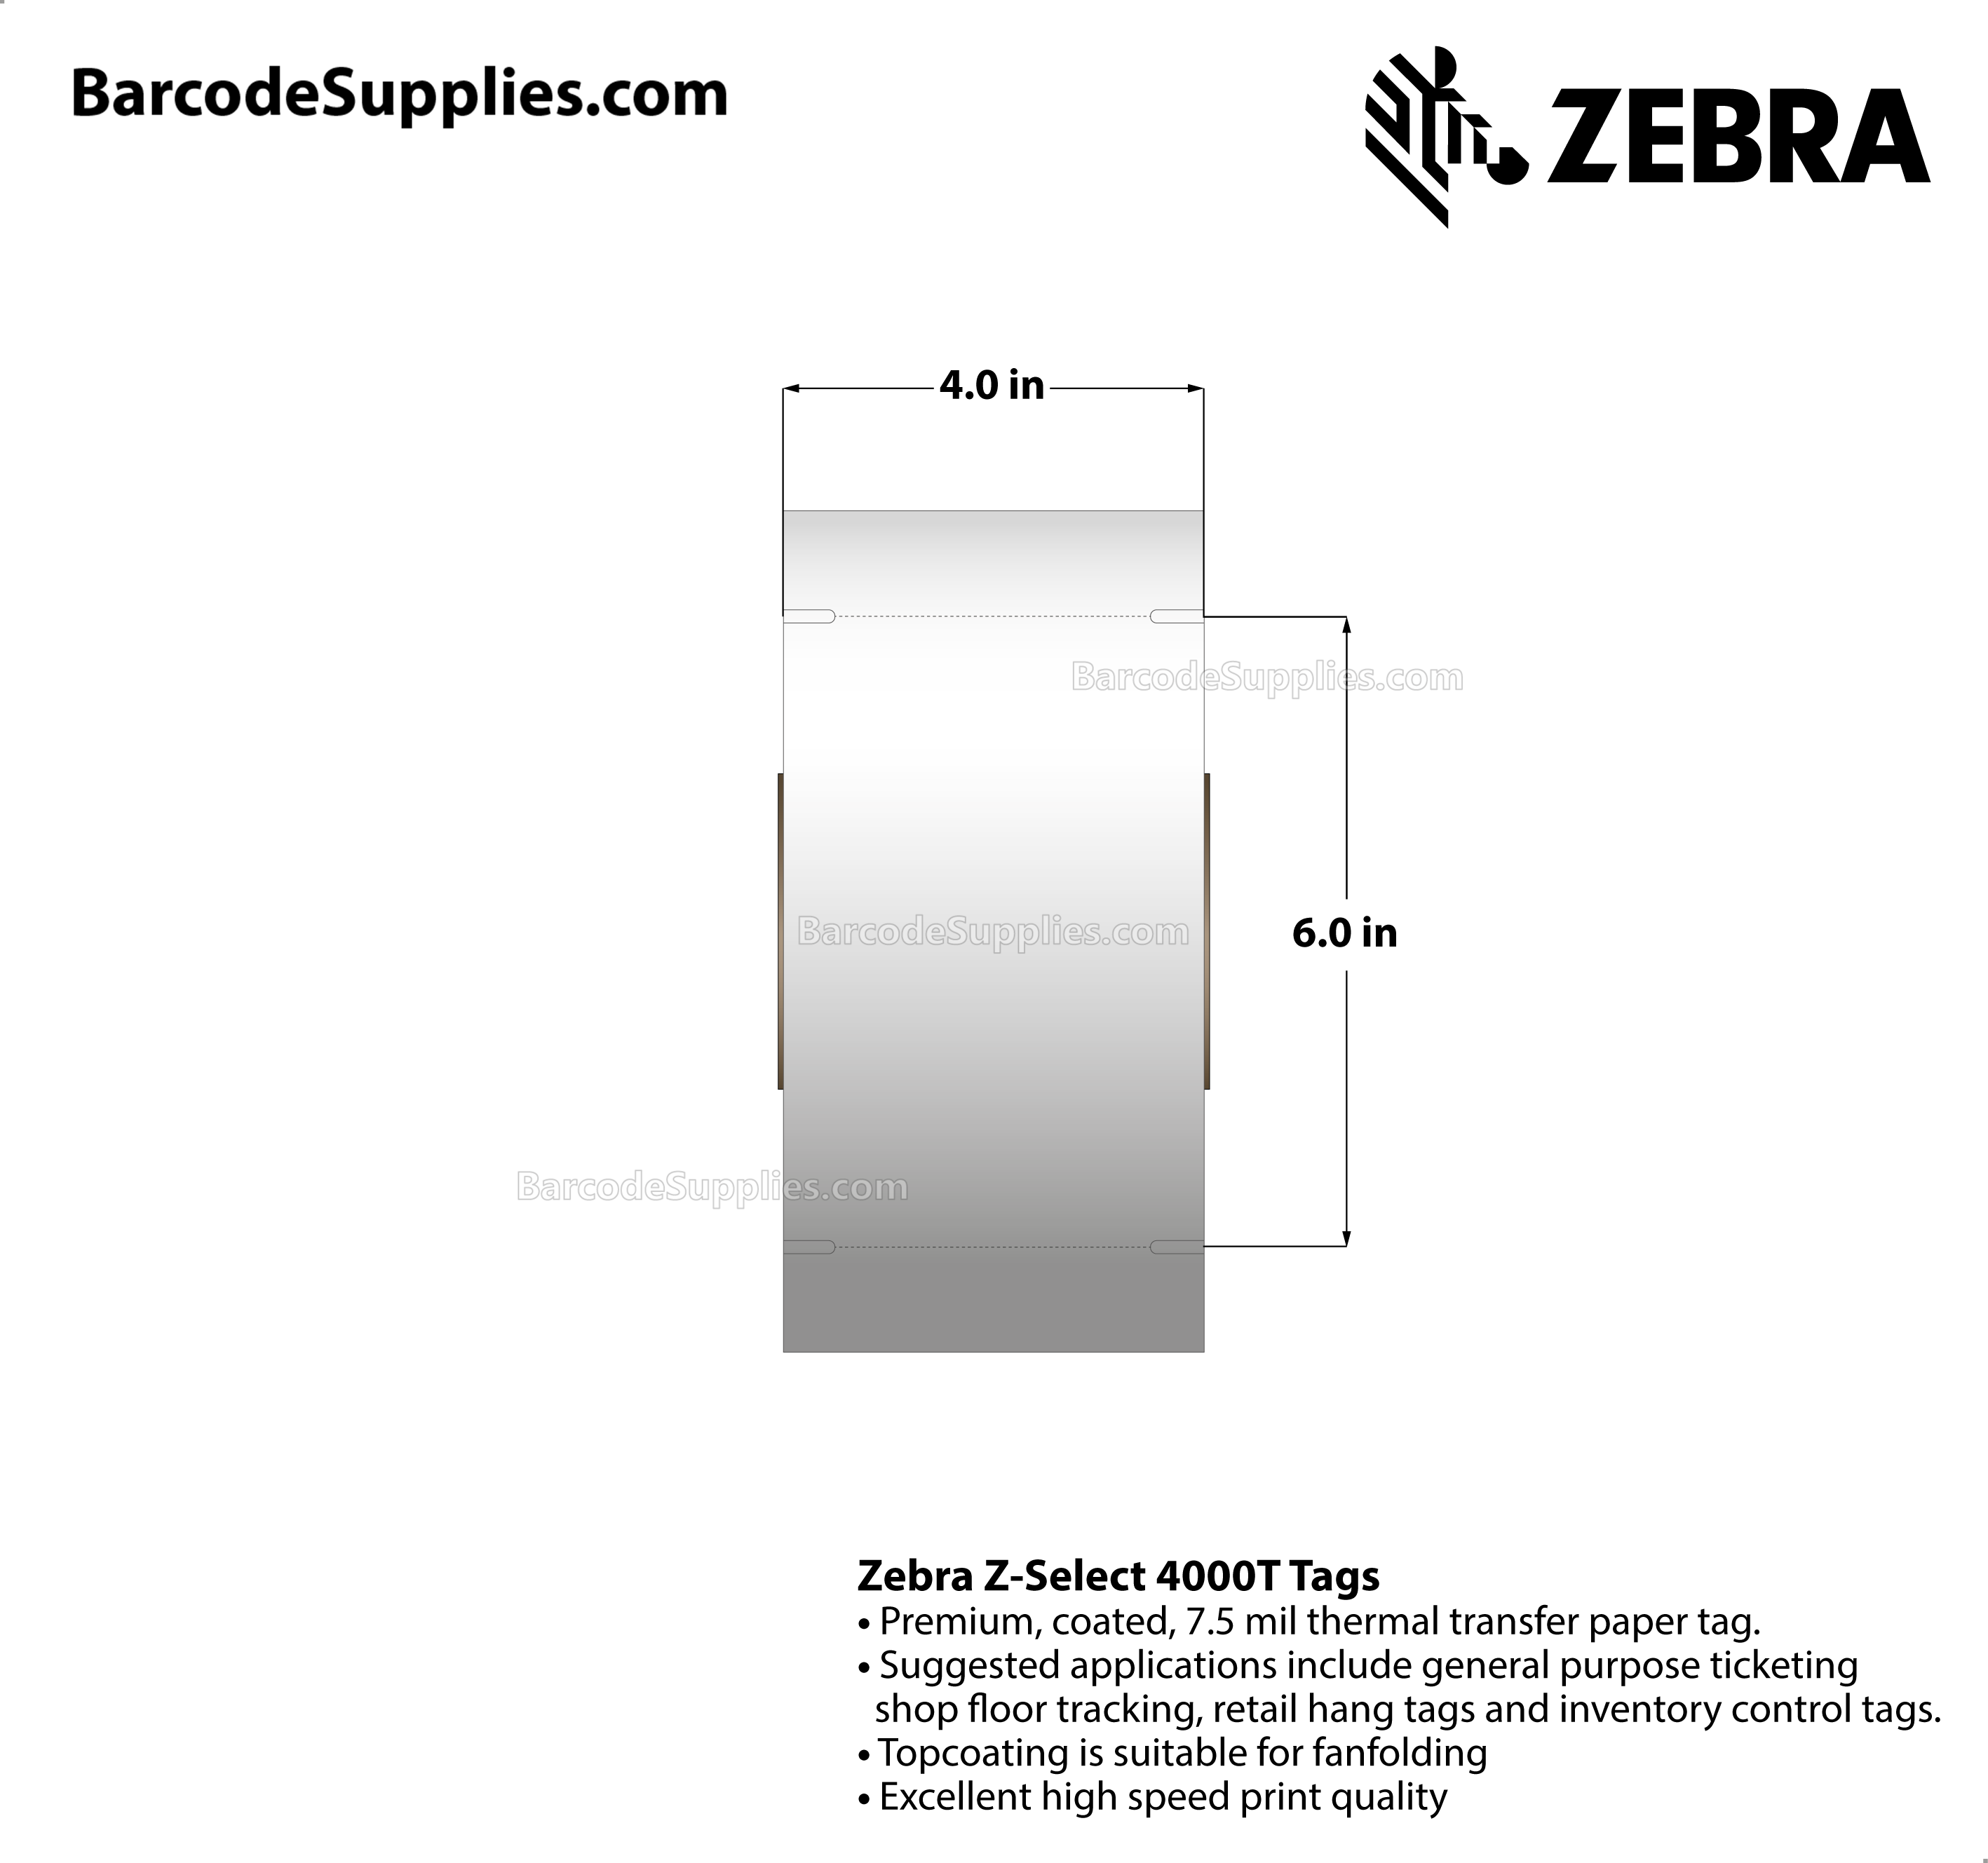 4 x 6 Thermal Transfer White Z-Select 4000T 7.0 mil Tag Tags With No Adhesive - Contains side sensing notch - Perforated - 860 Tags Per Roll - Carton Of 4 Rolls - 3440 Tags Total - MPN: 72352